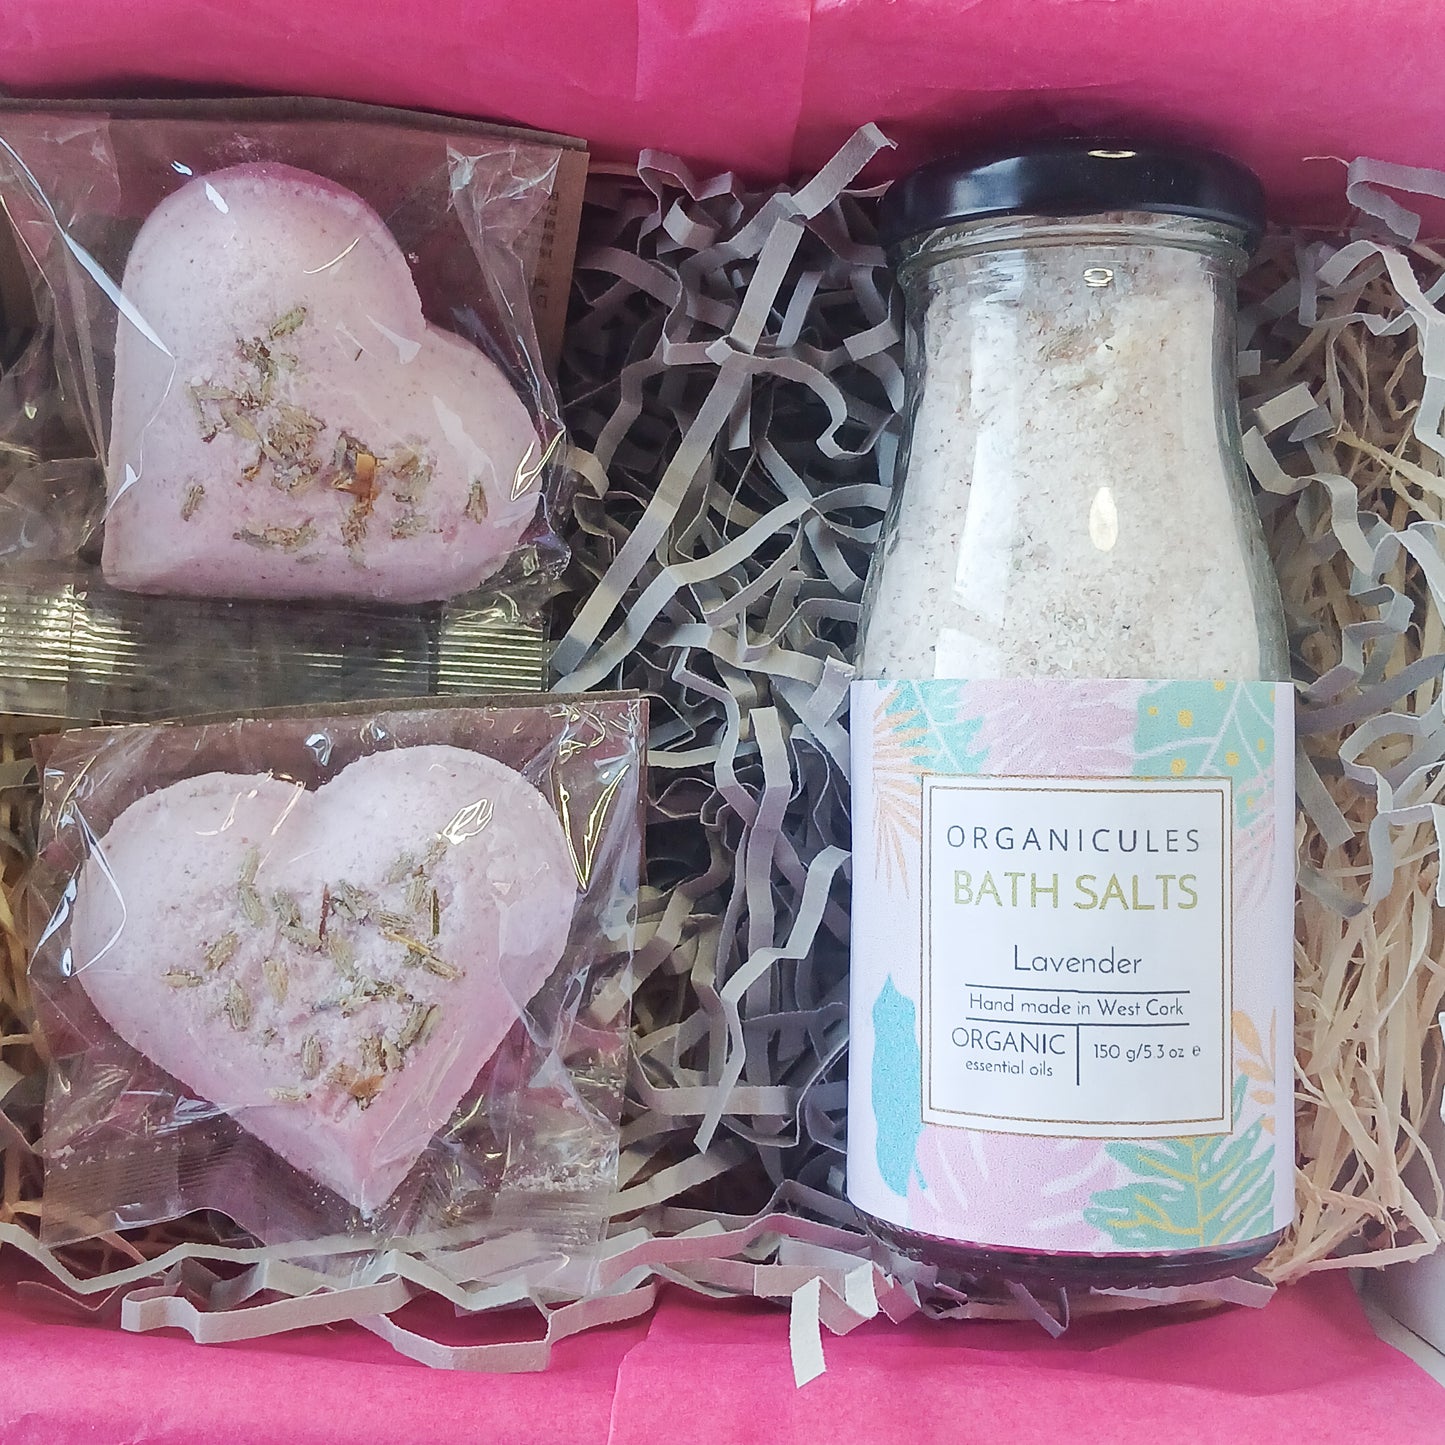 Lavender gift box containg a bottle of lavender bath salts and two lavender bath bombs